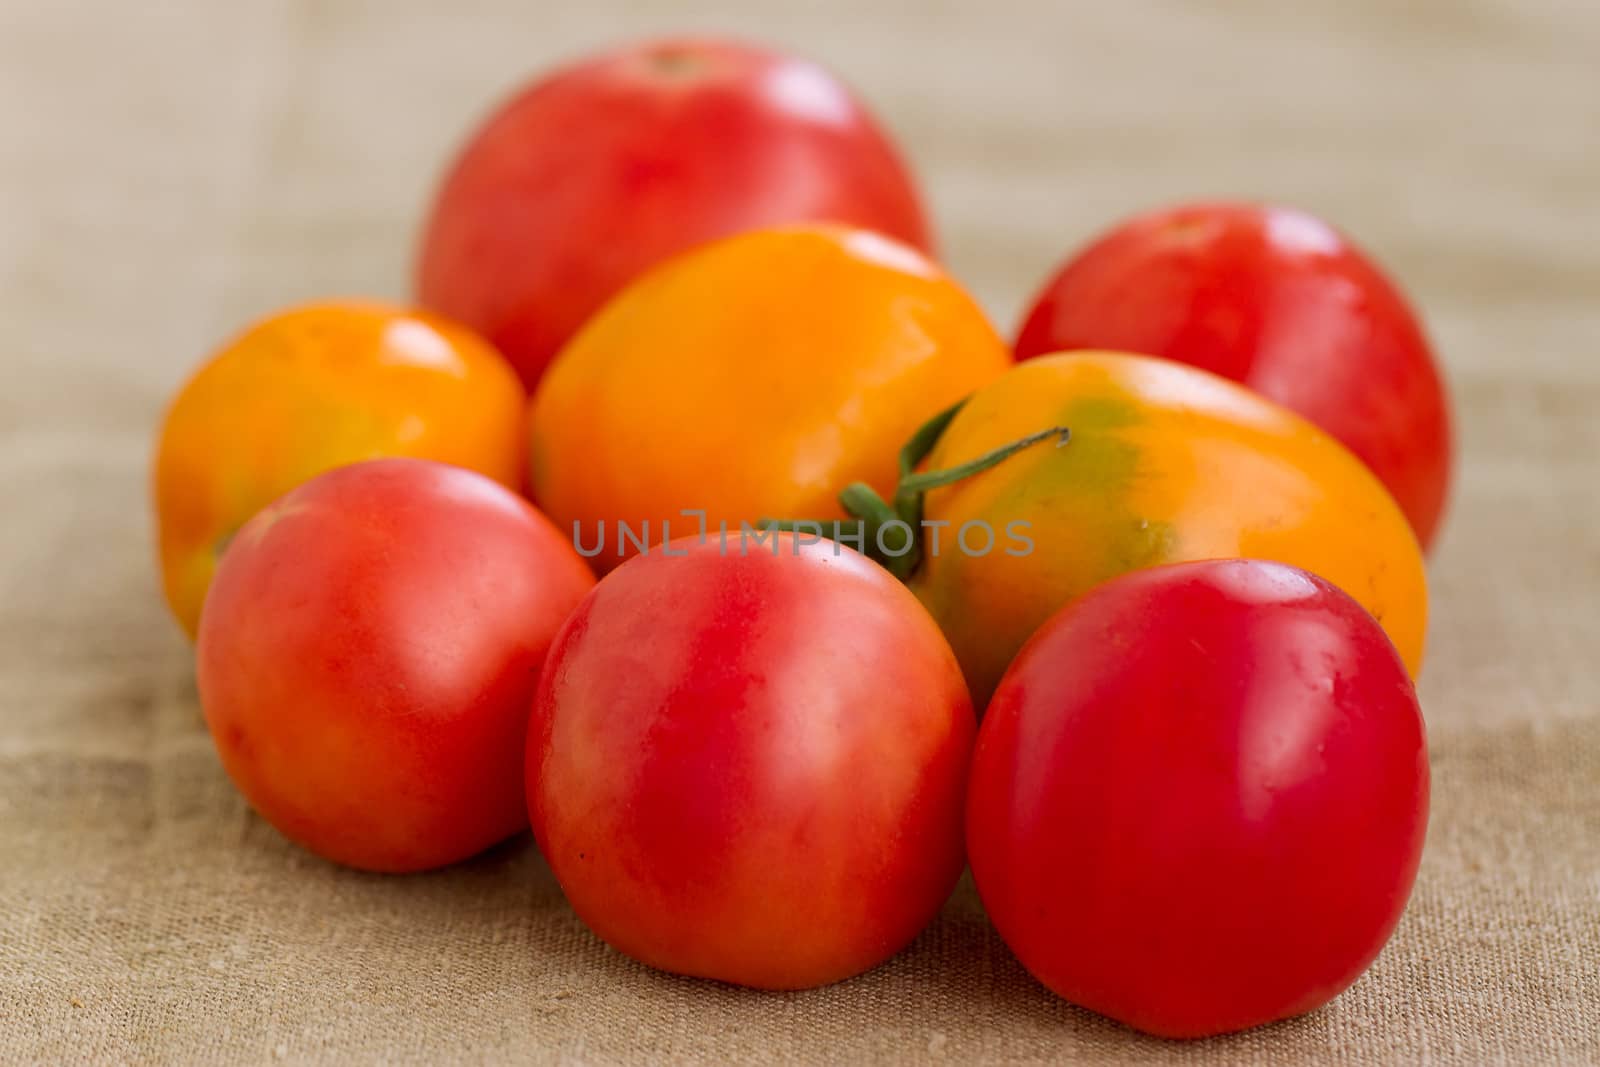 Yellow and red tomatoes by victosha